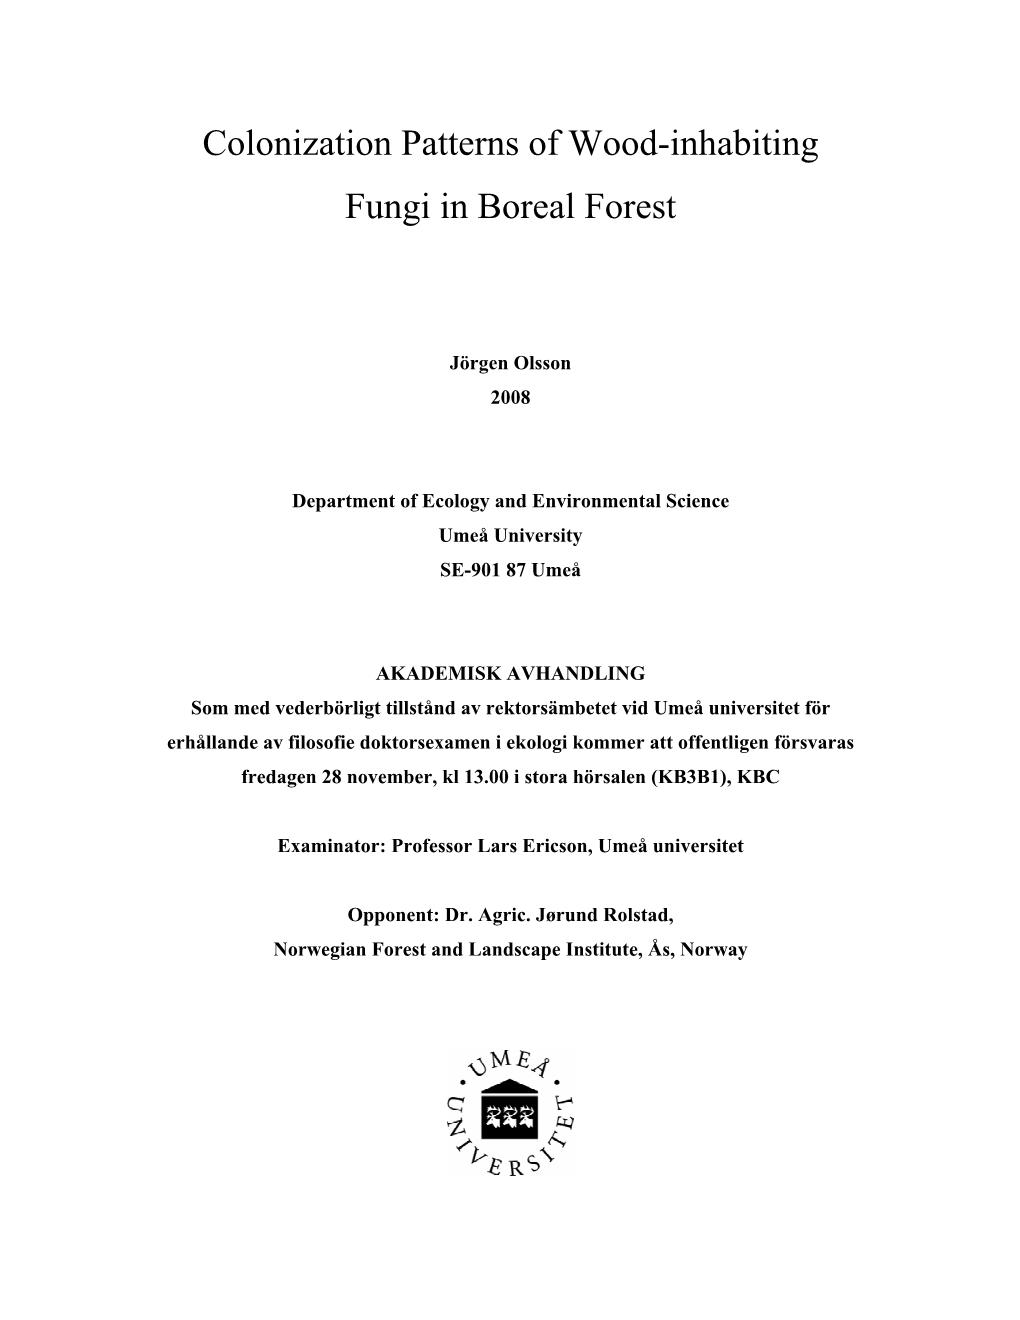 Colonization Patterns of Wood-Inhabiting Fungi in Boreal Forest